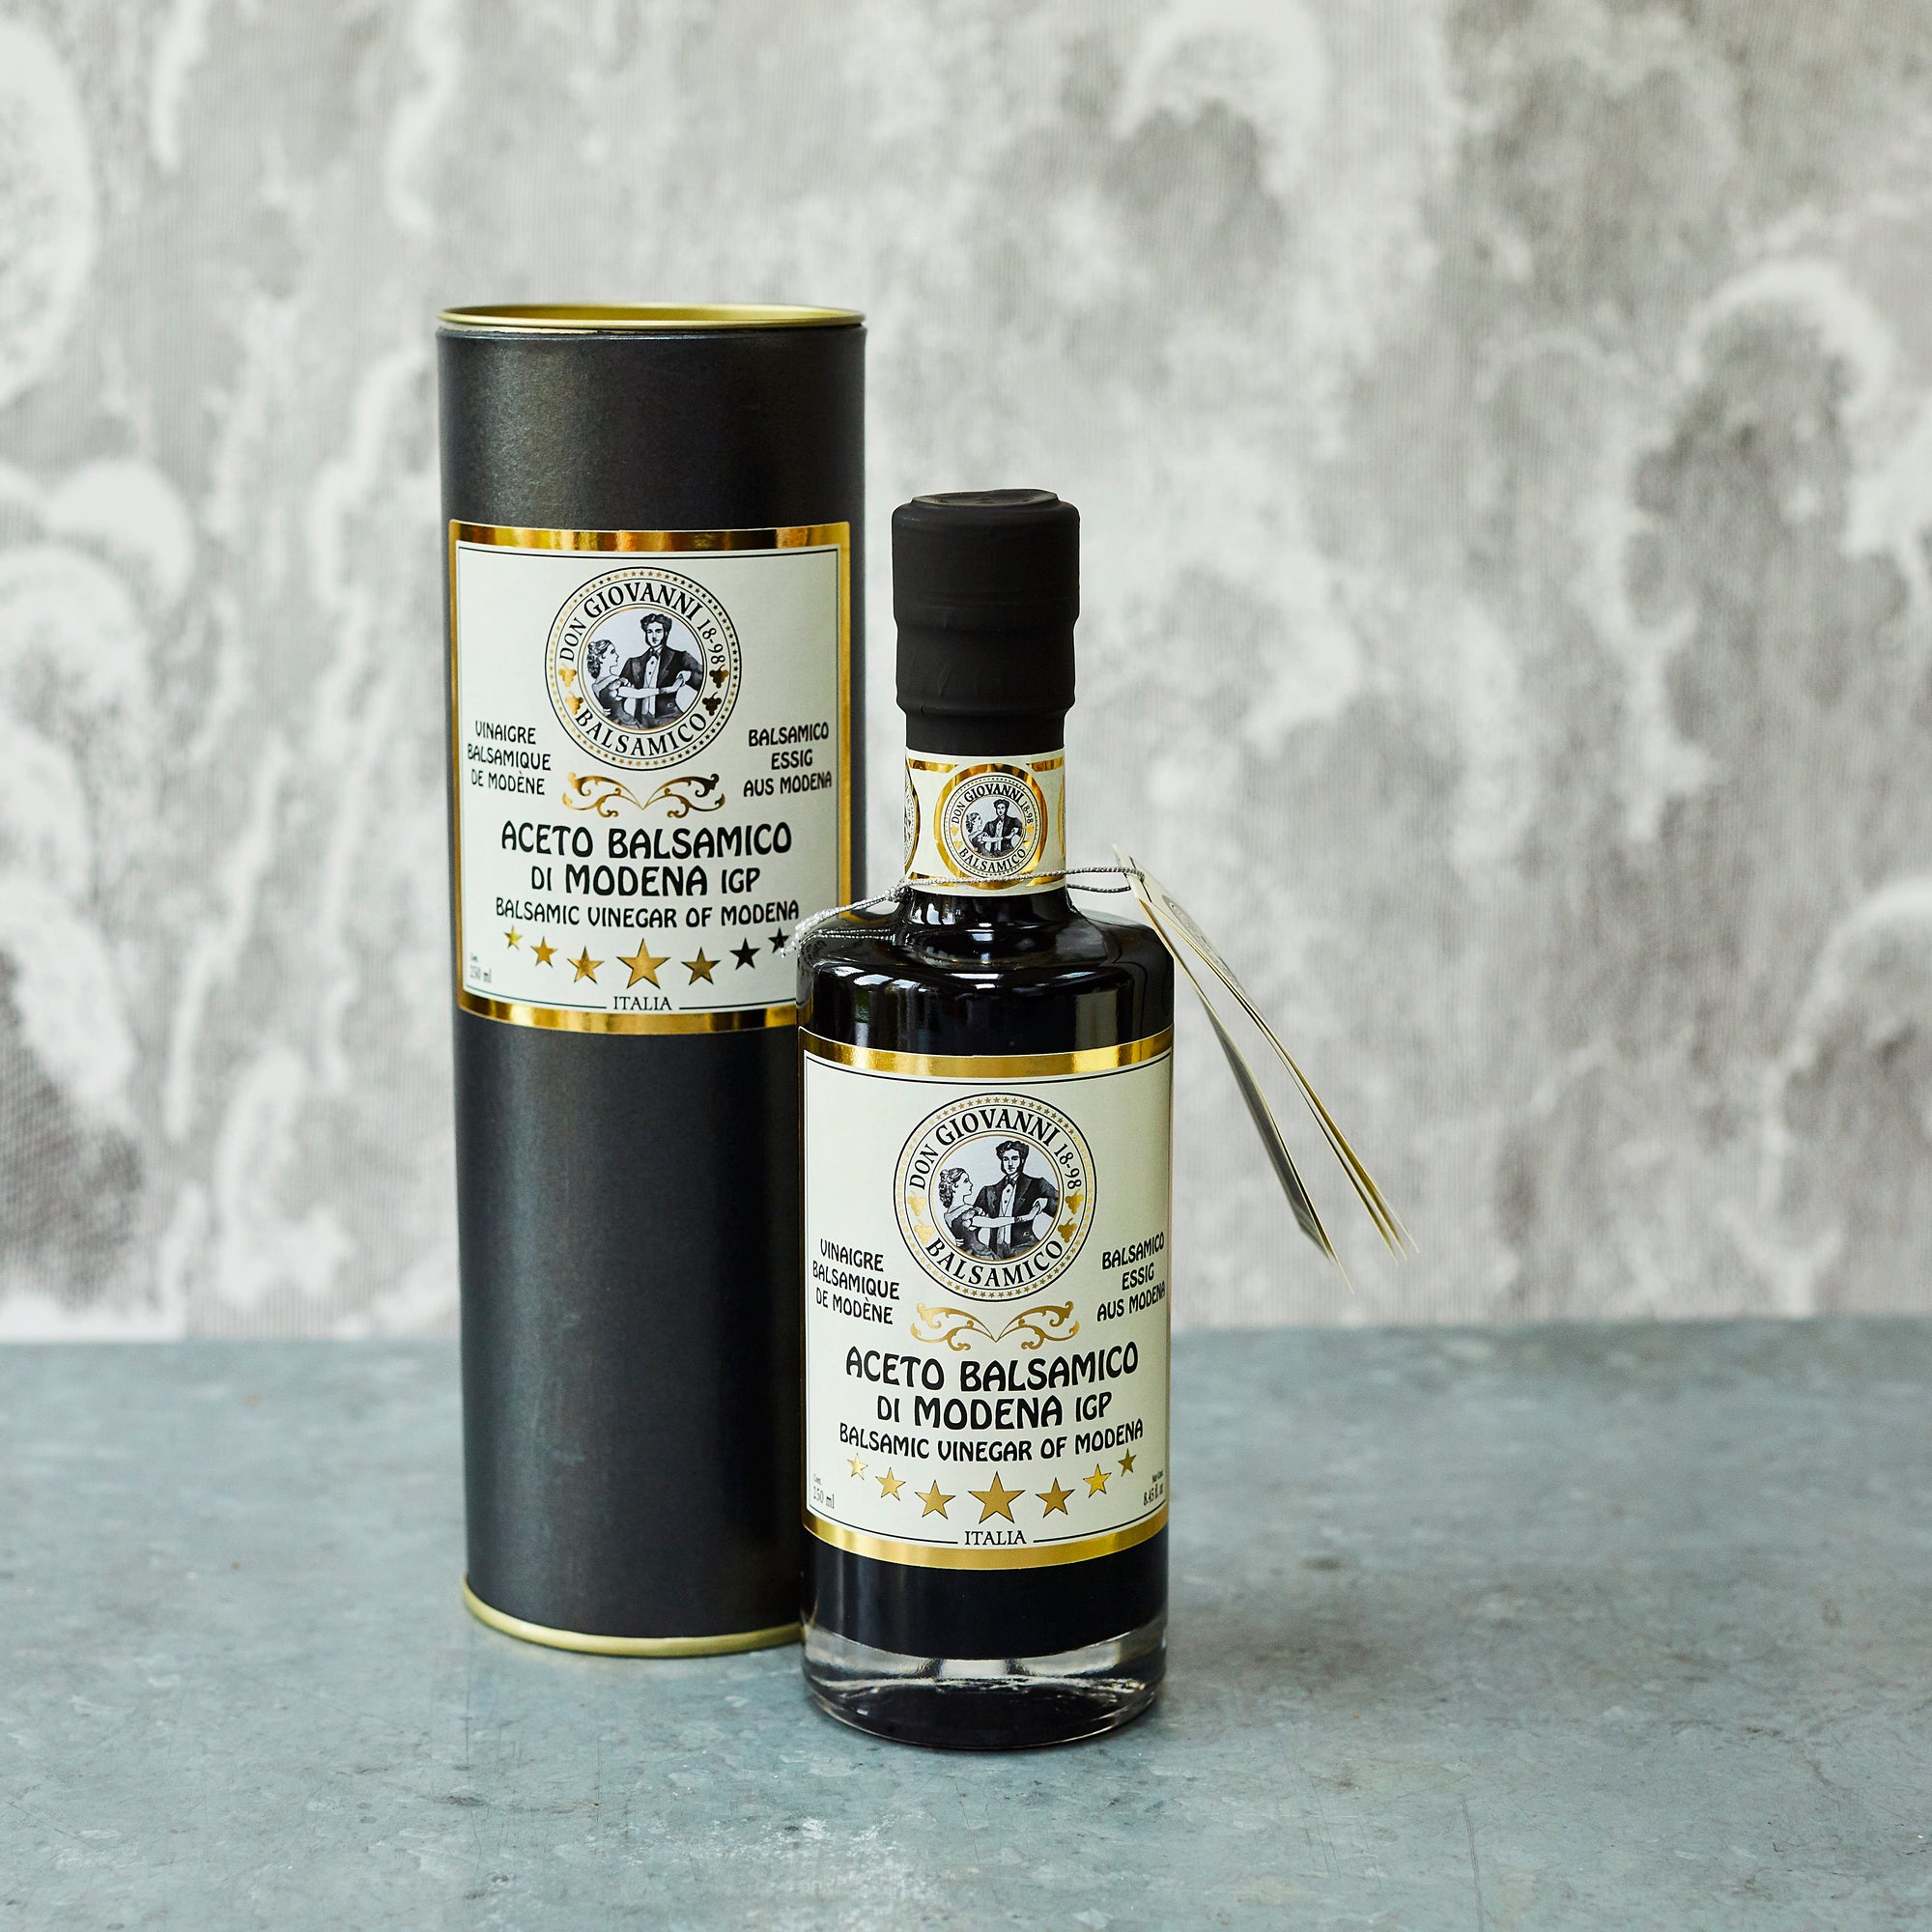 Don Giovanni Aceto Balsamico IGP (15 years) - Vinegar Shed